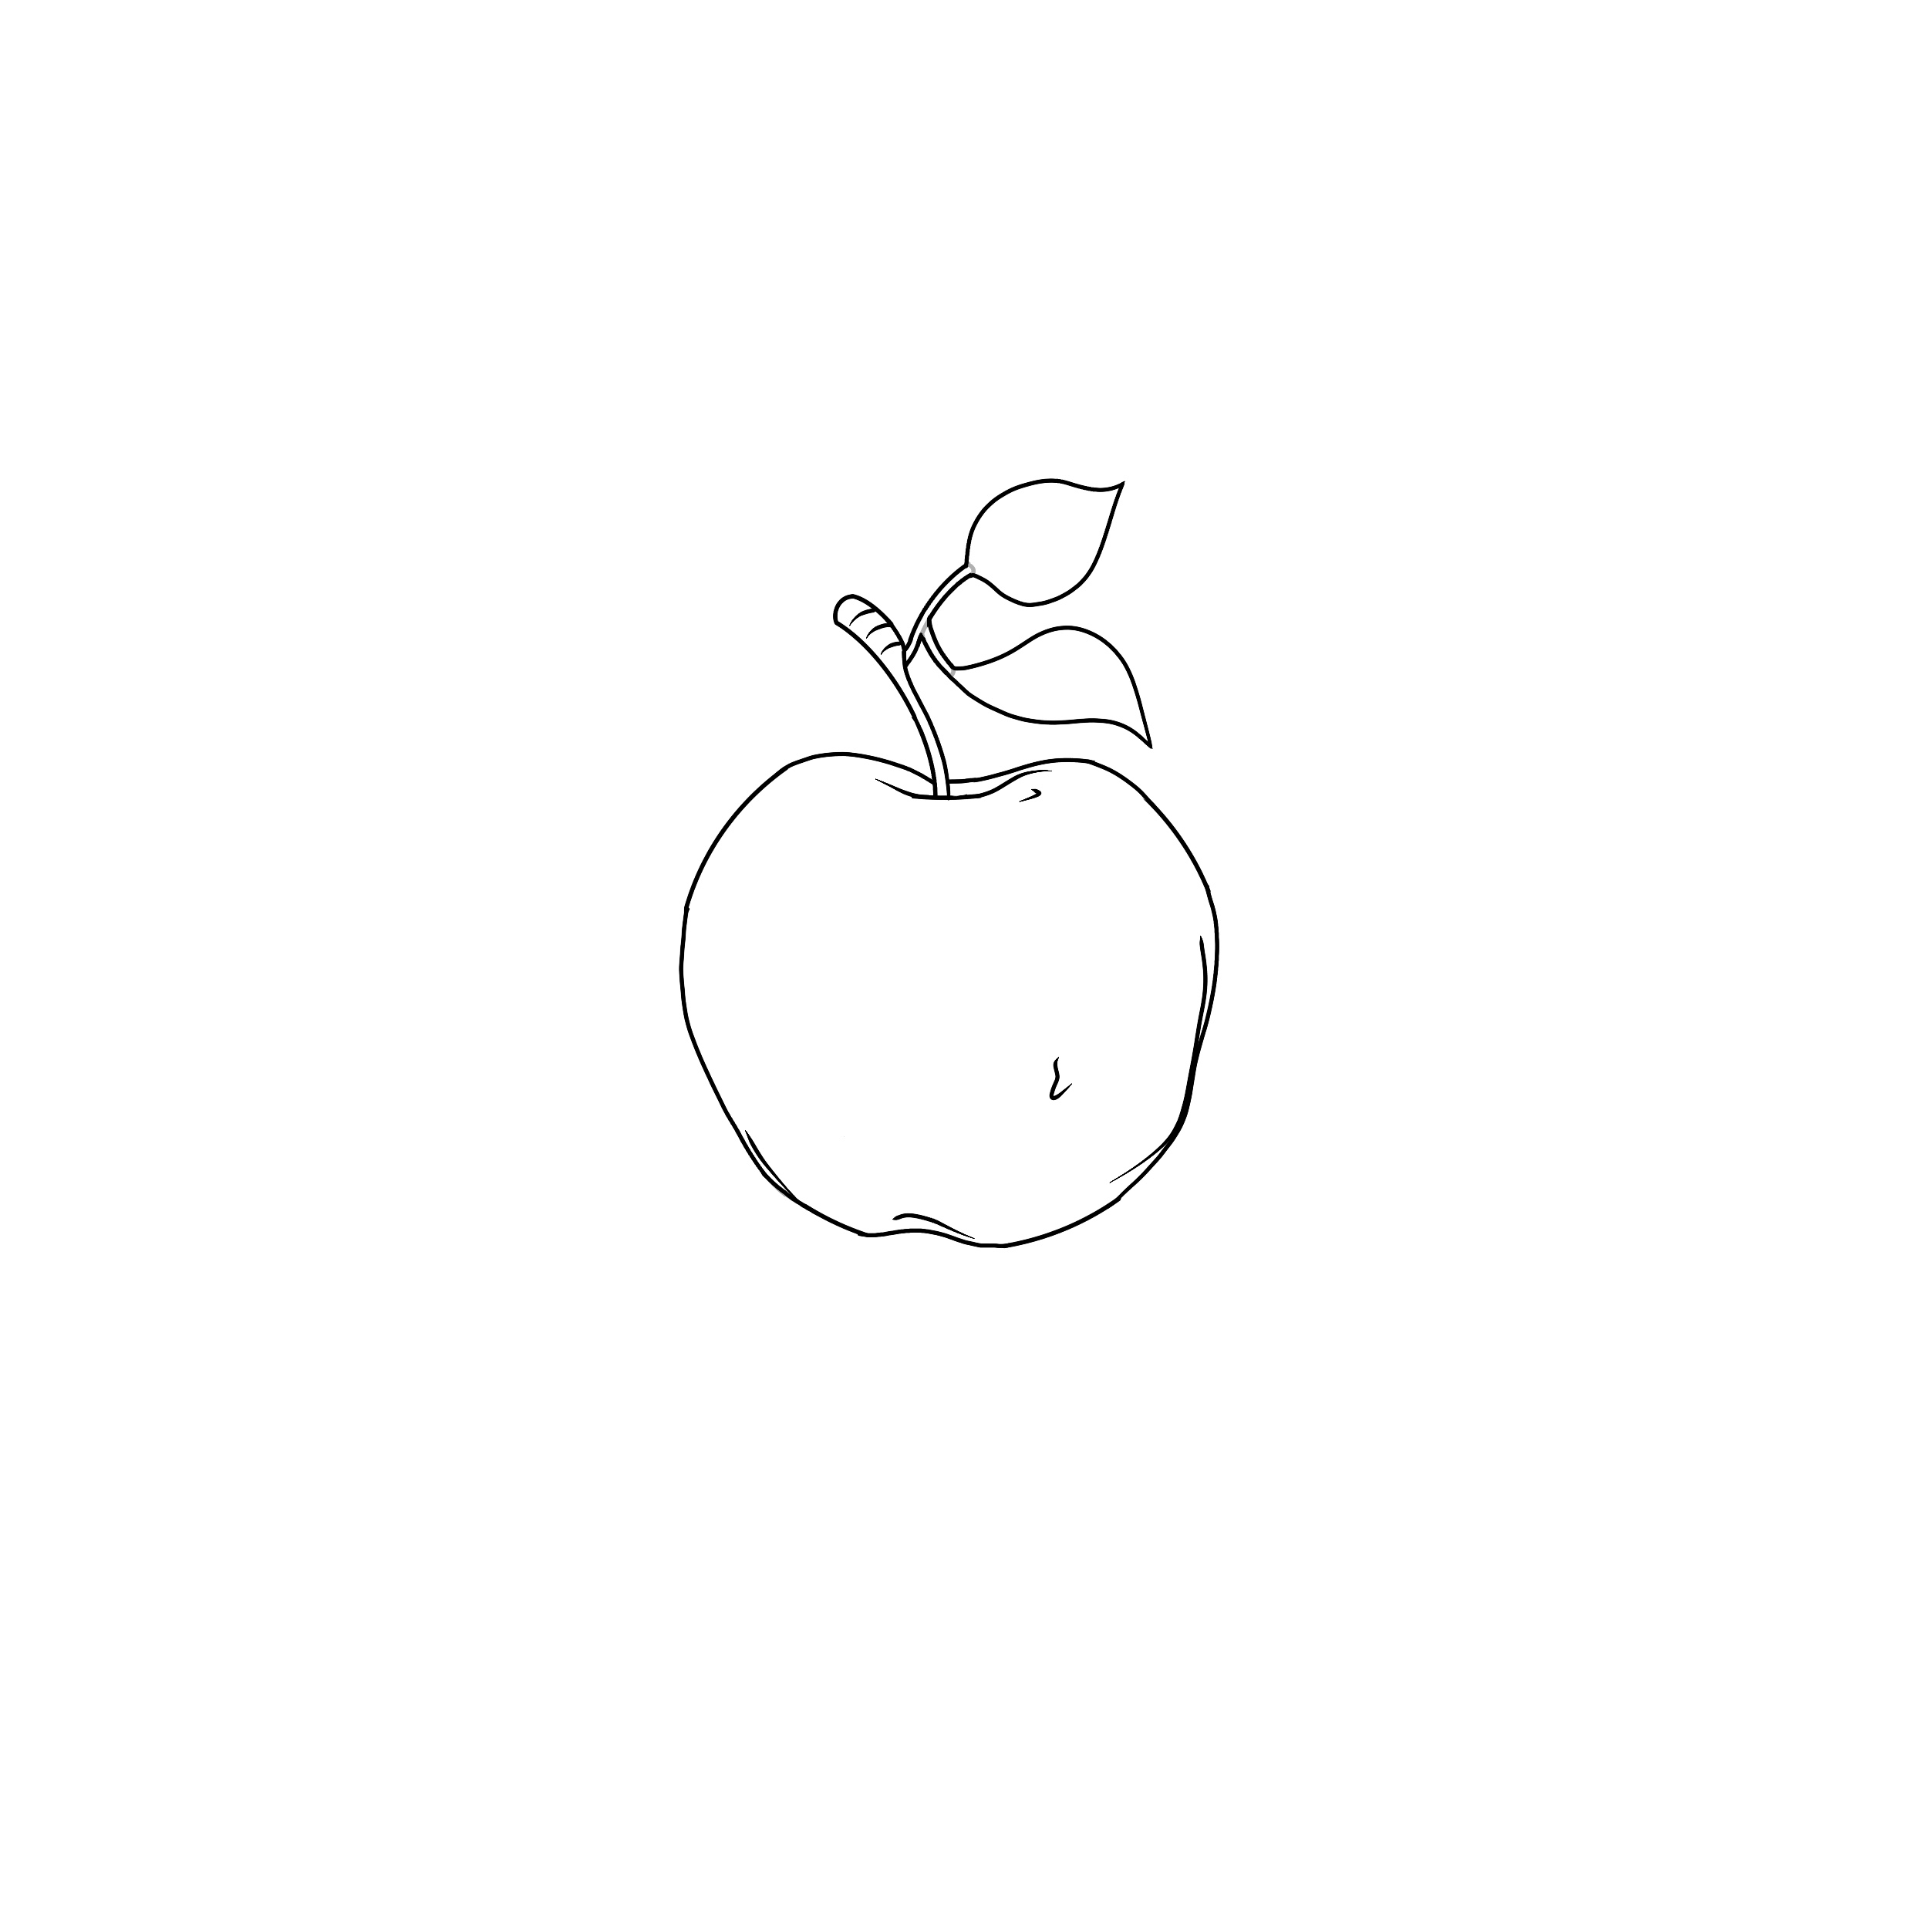 how to draw an apple step 3 draw apple leaves and stem